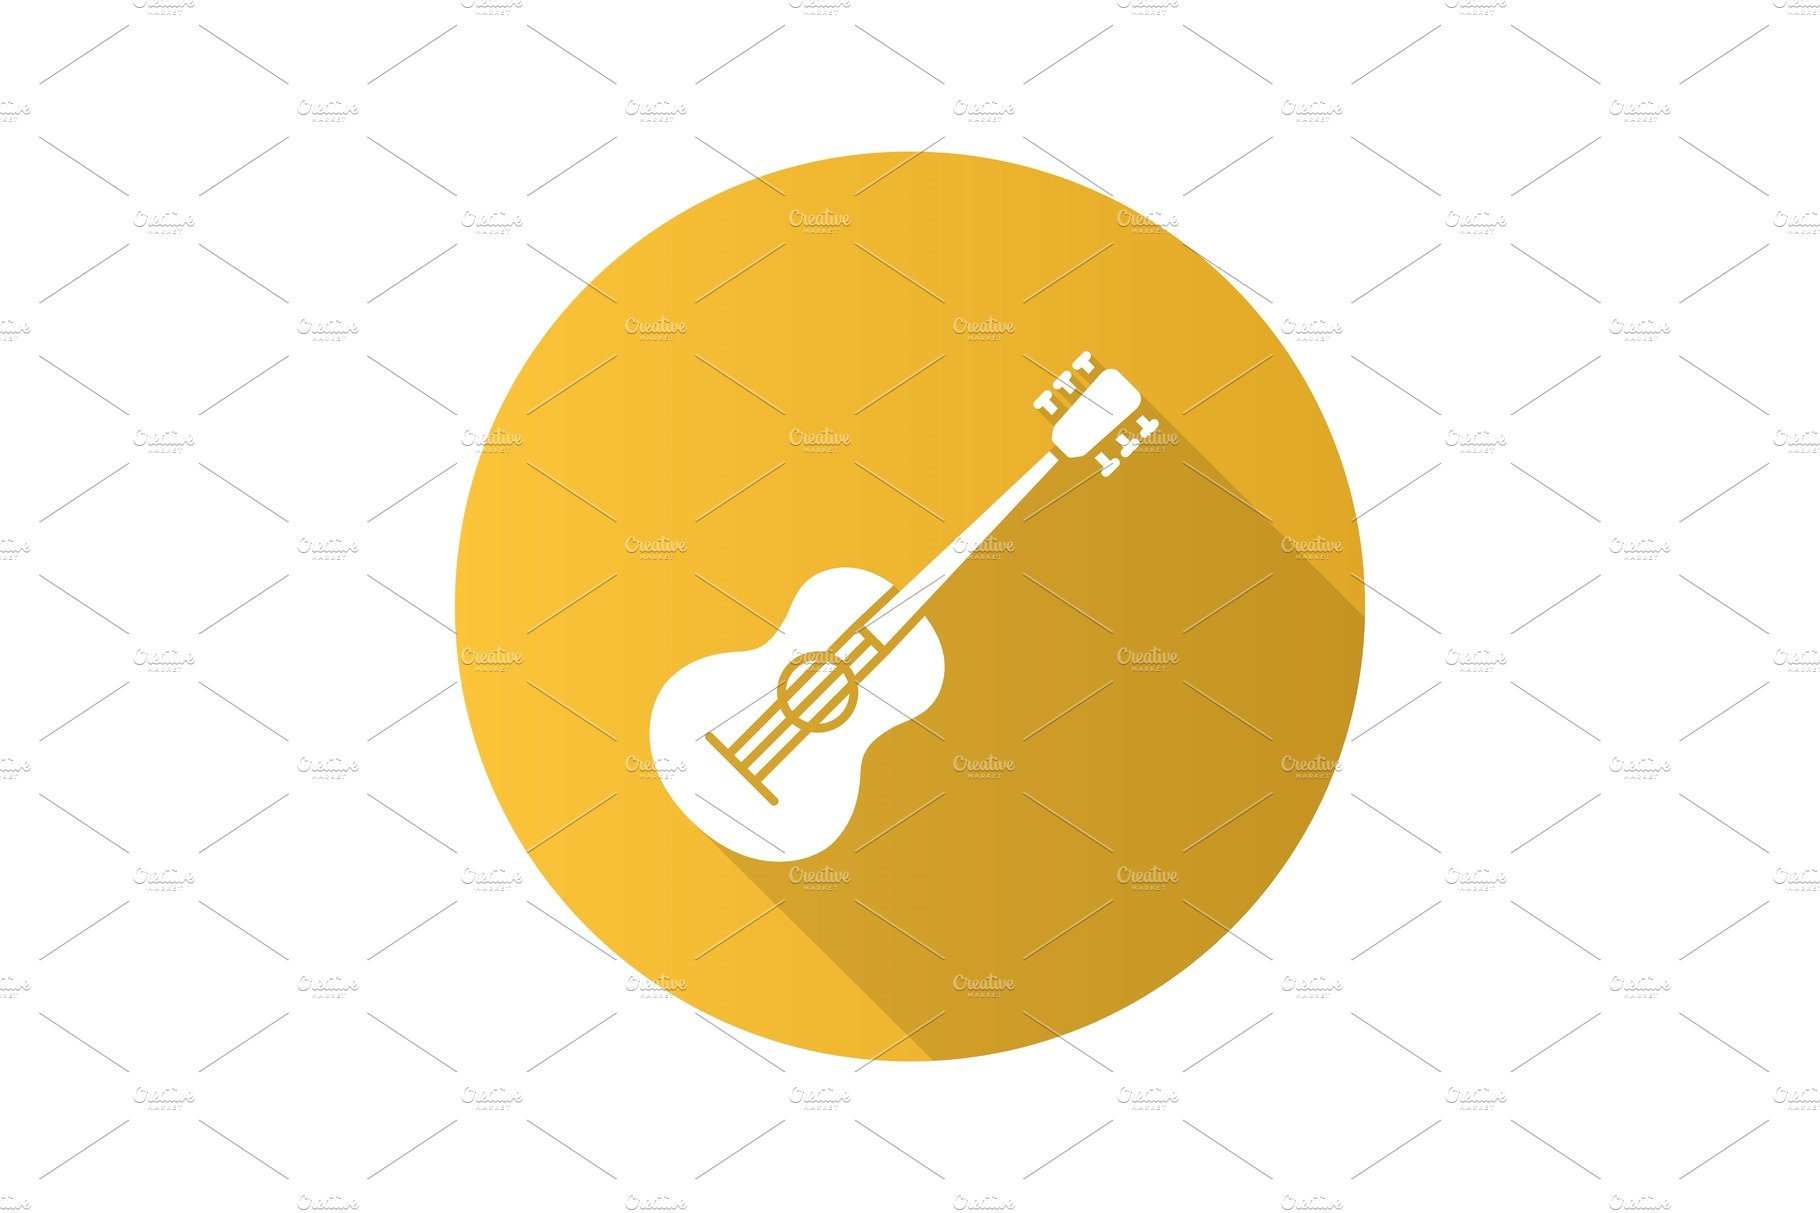 Guitar flat design long shadow glyph icon cover image.